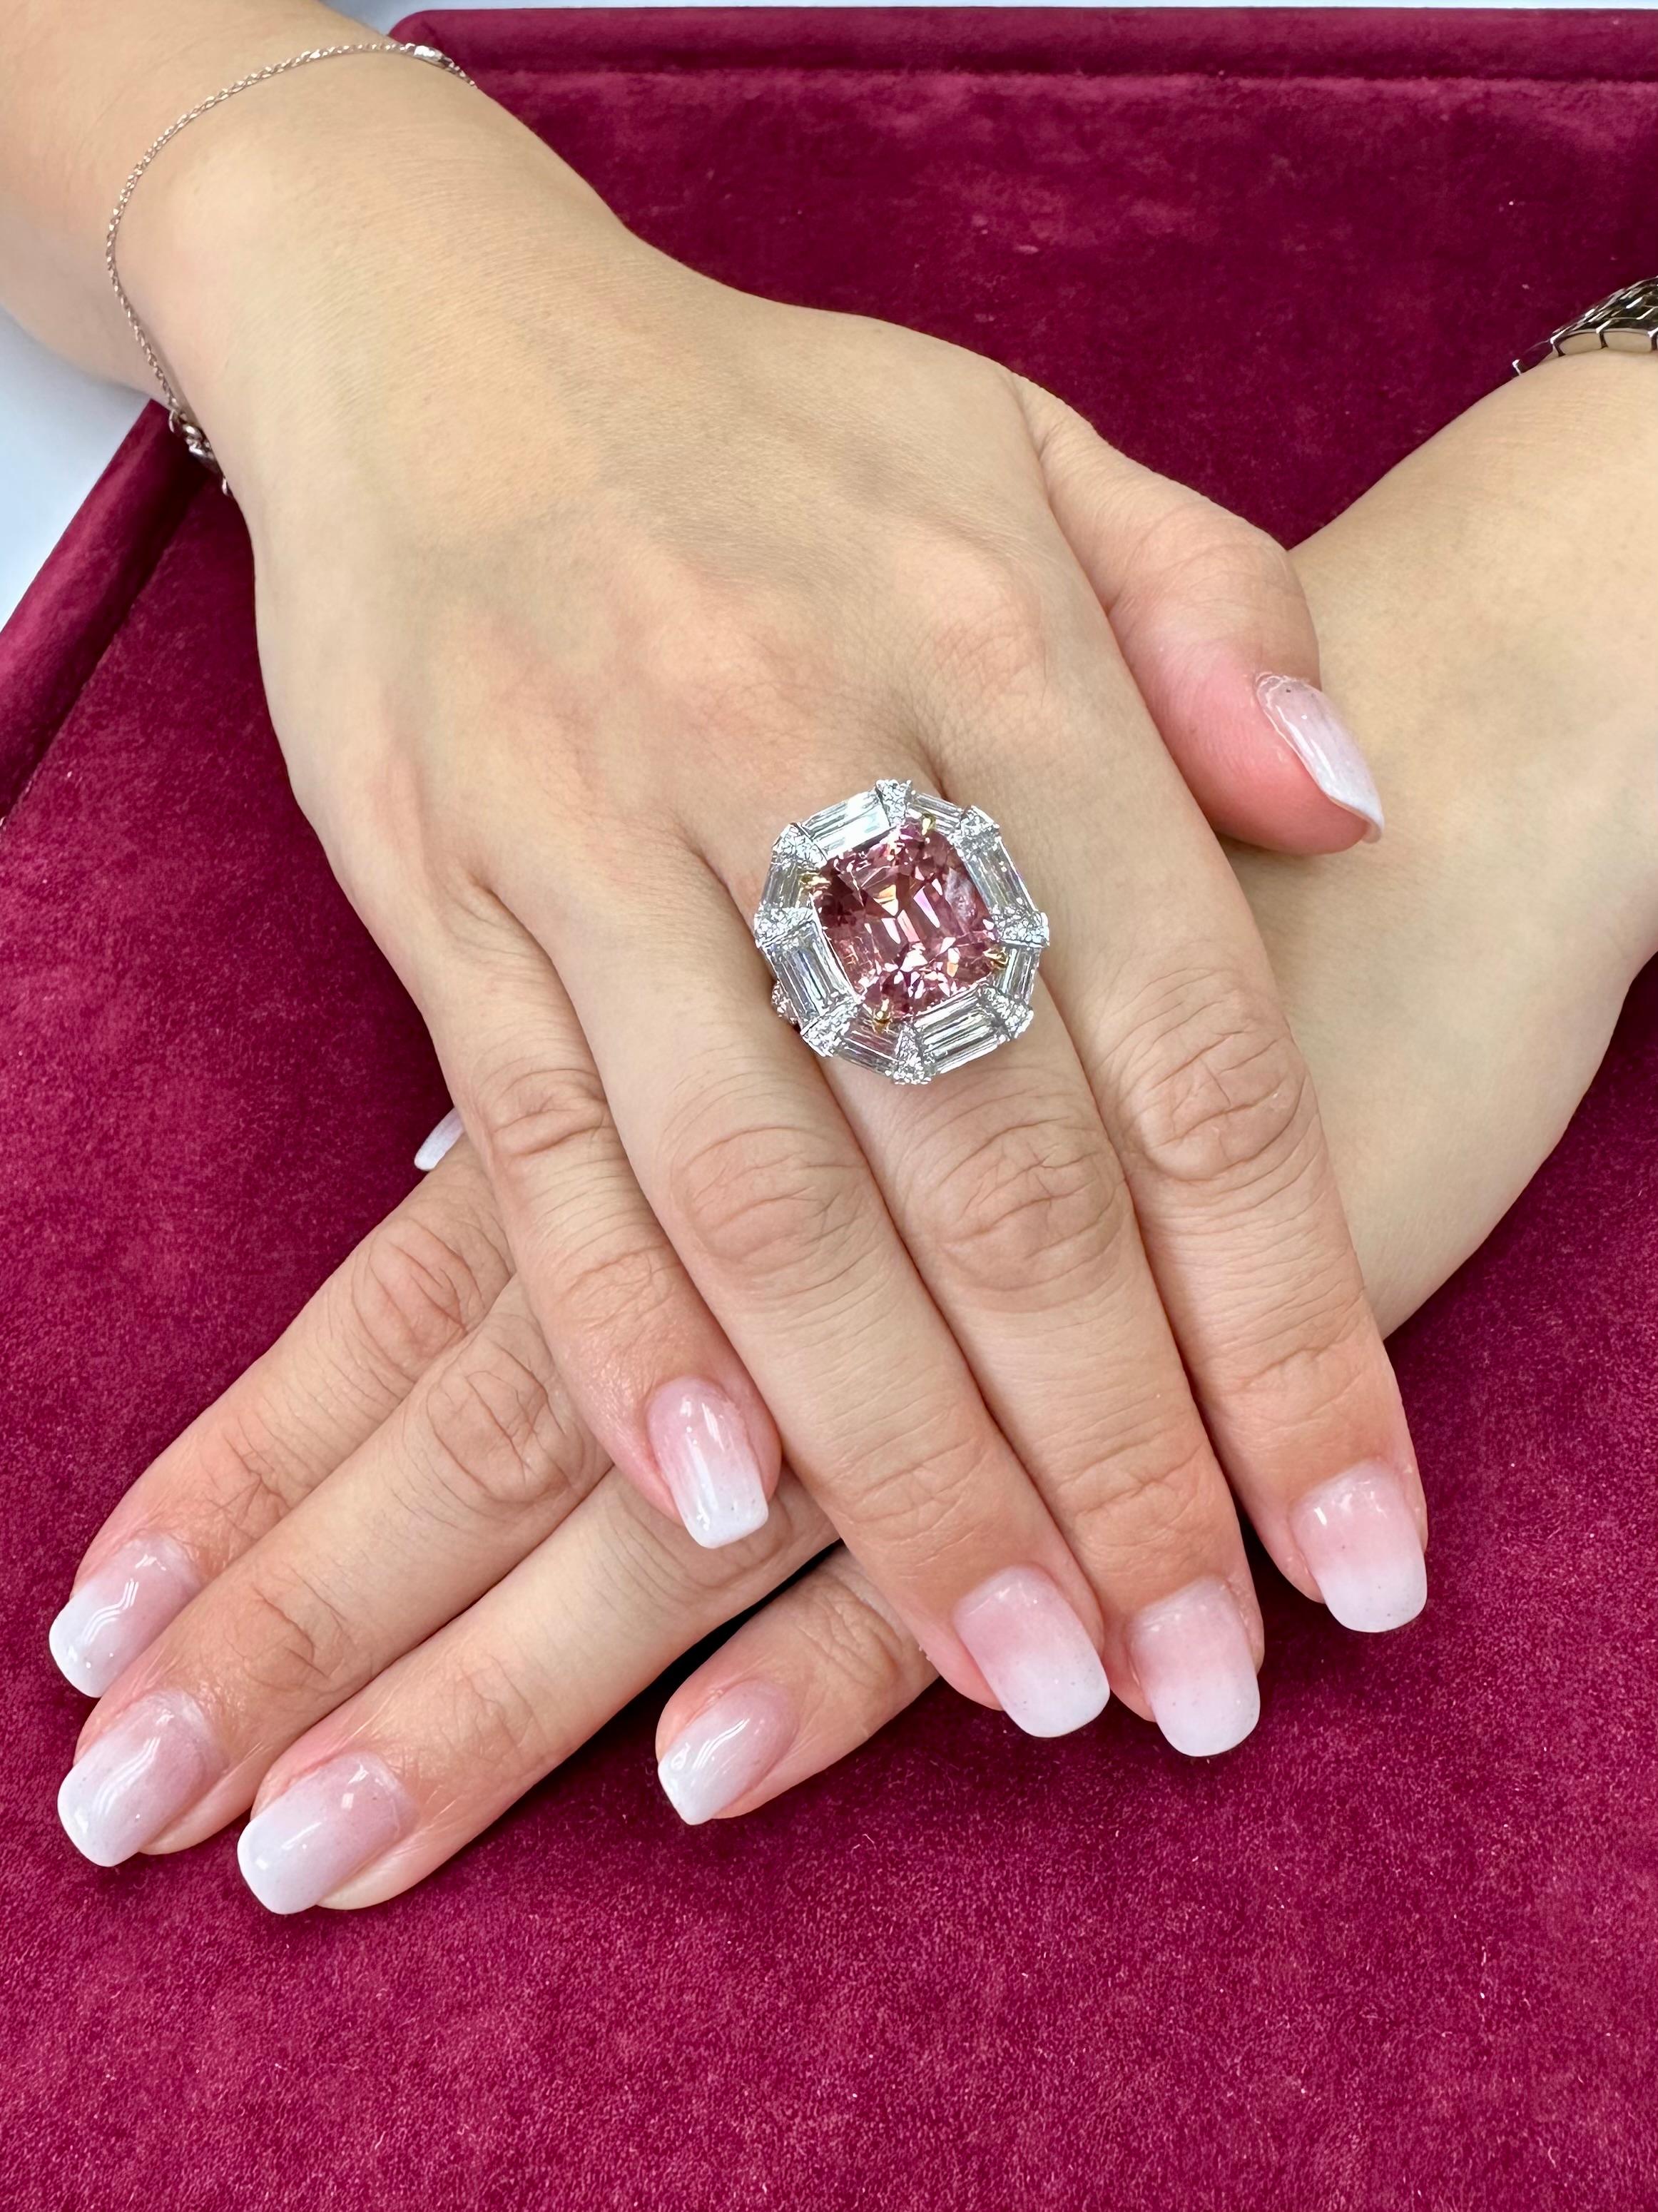 Please check out the HD video! Here is a large oversized 10.43 cts pink tourmaline and diamond ring. The 18k white gold mounting is set with 3.23cts of specialty cut diamonds and 0.68cts of round diamonds. All in all a total of 3.91cts of diamonds.